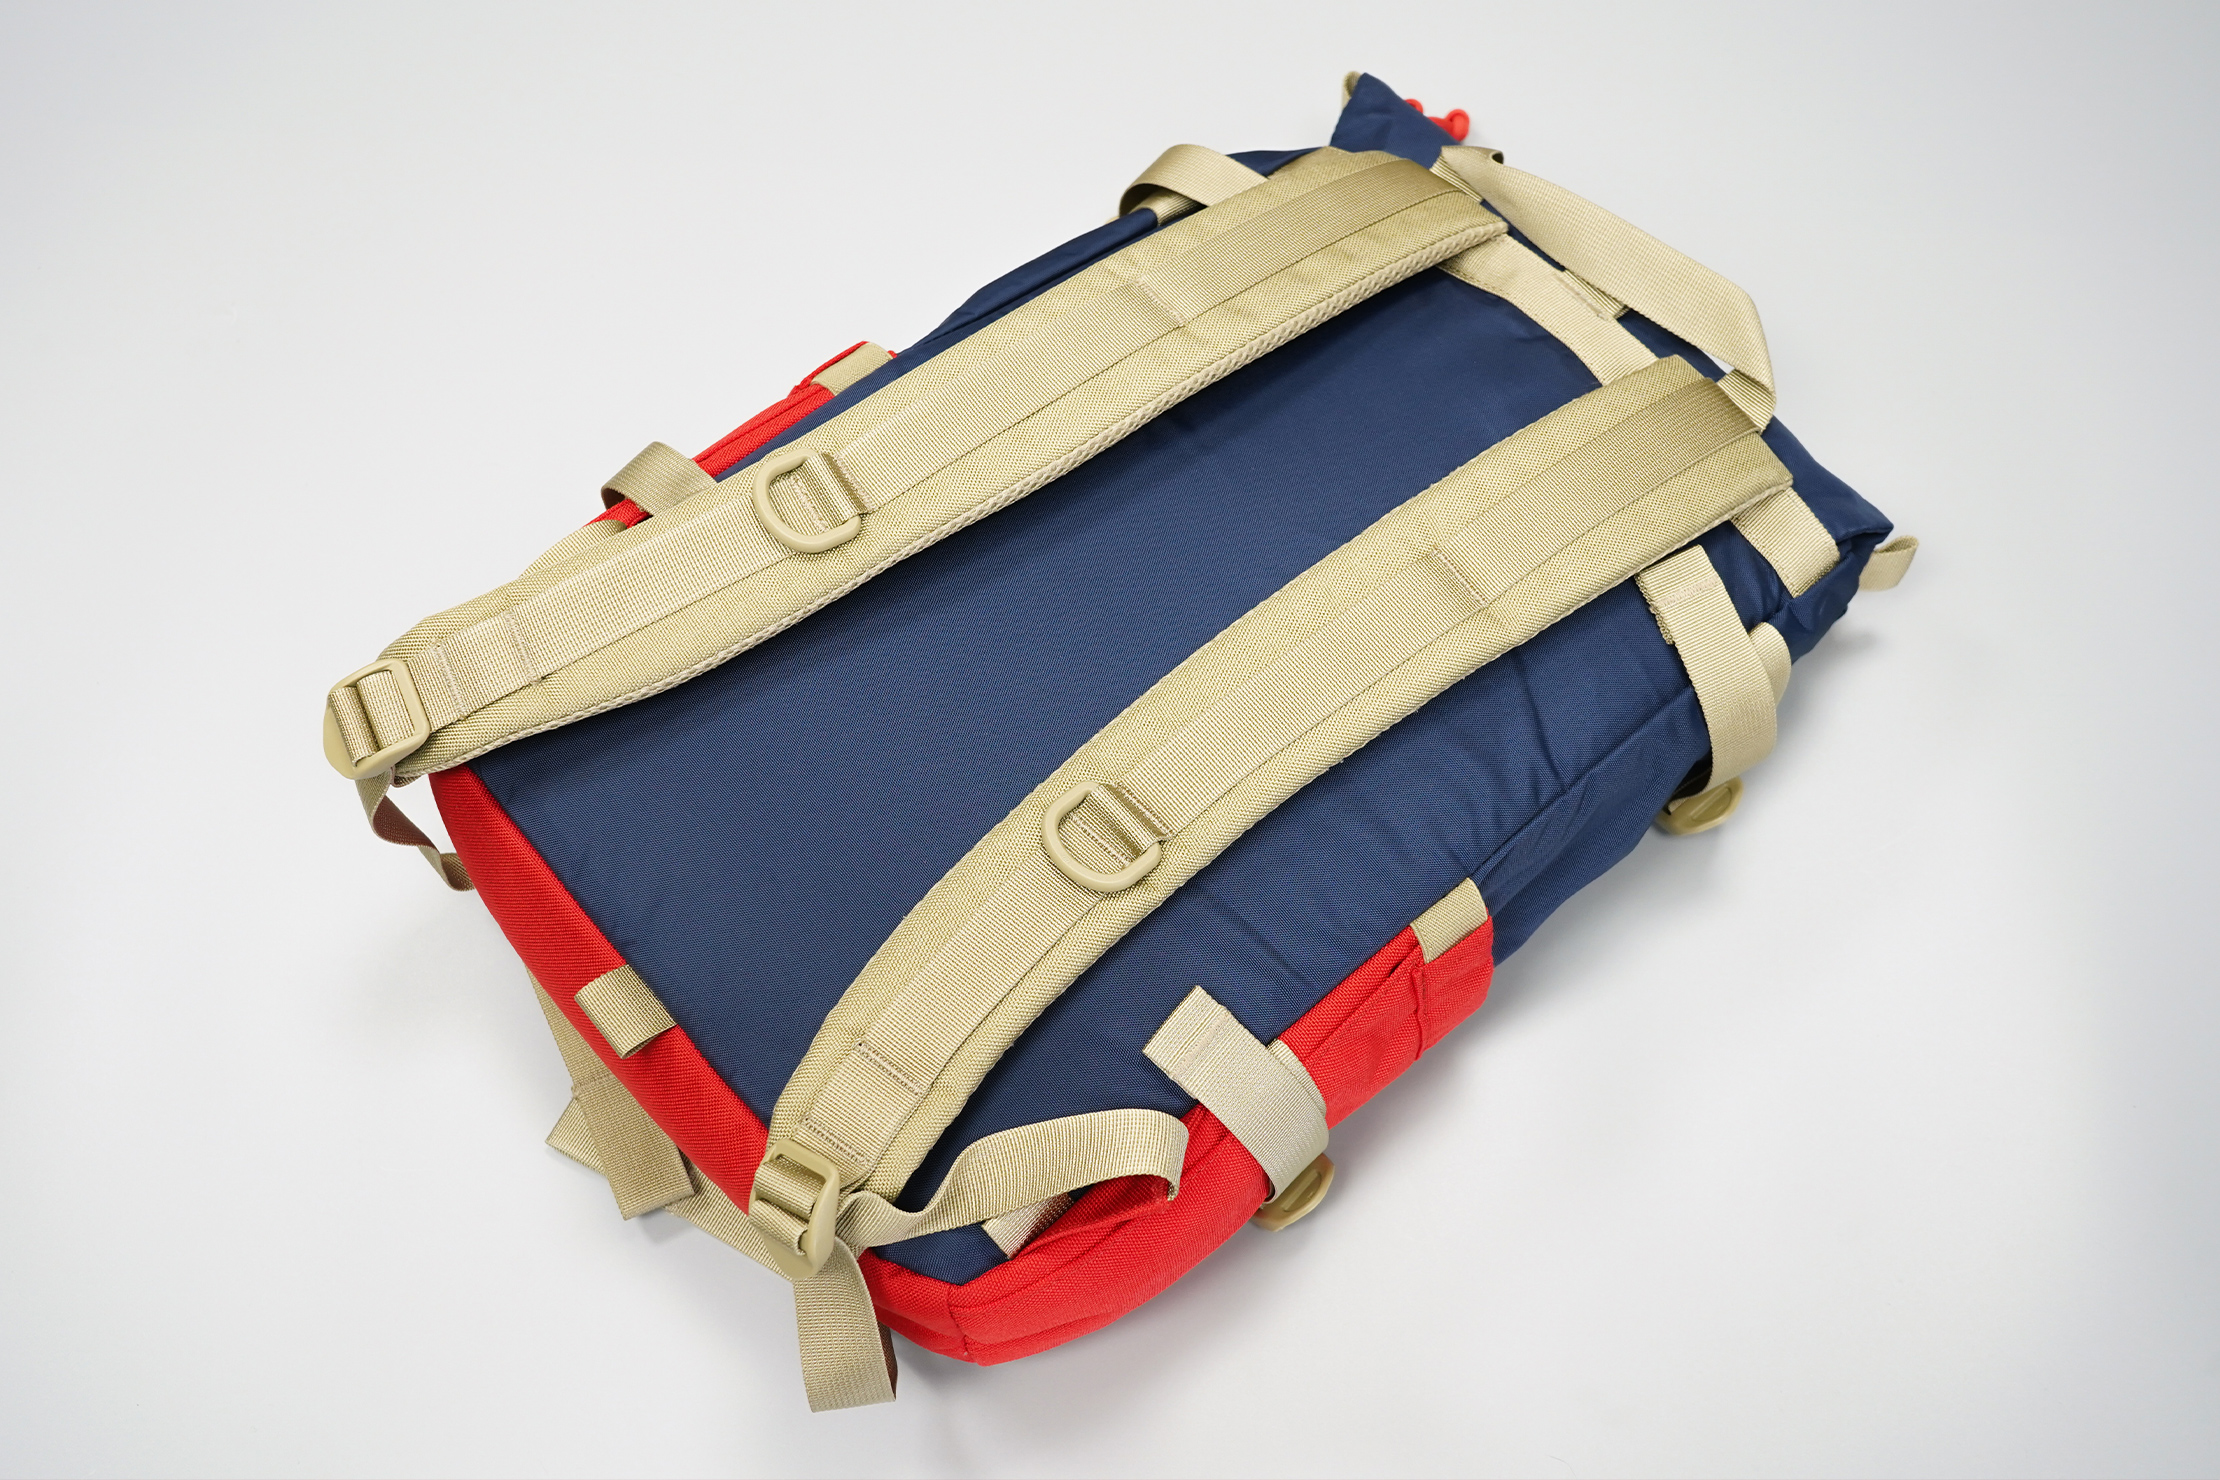 Topo Designs Rover Pack Classic | The simple harness system can be augmented by an optional sternum strap and hip belt, available as separate purchases